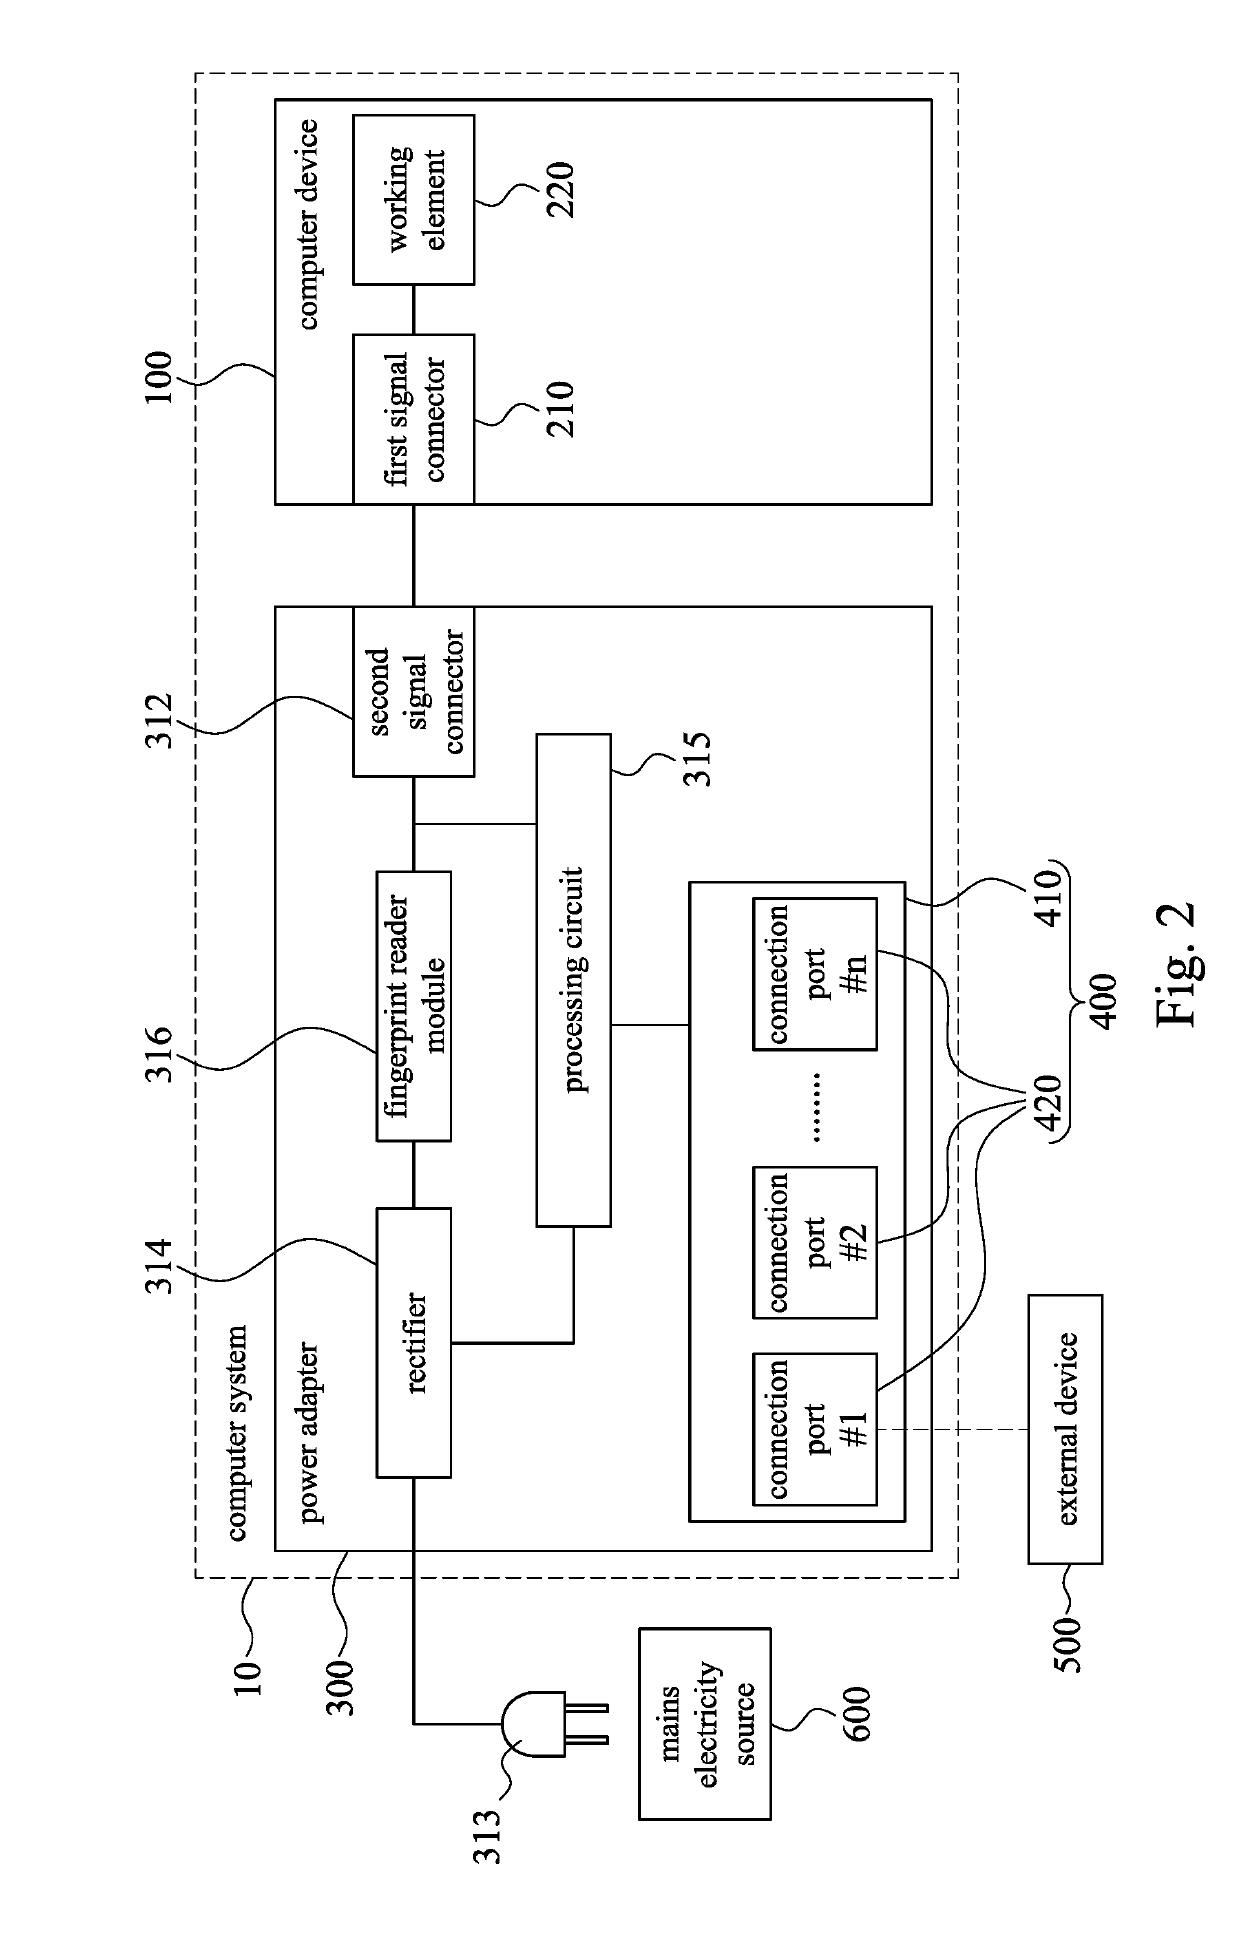 Computer System And Its Power Adapter Having Input / Output Connection Interfaces